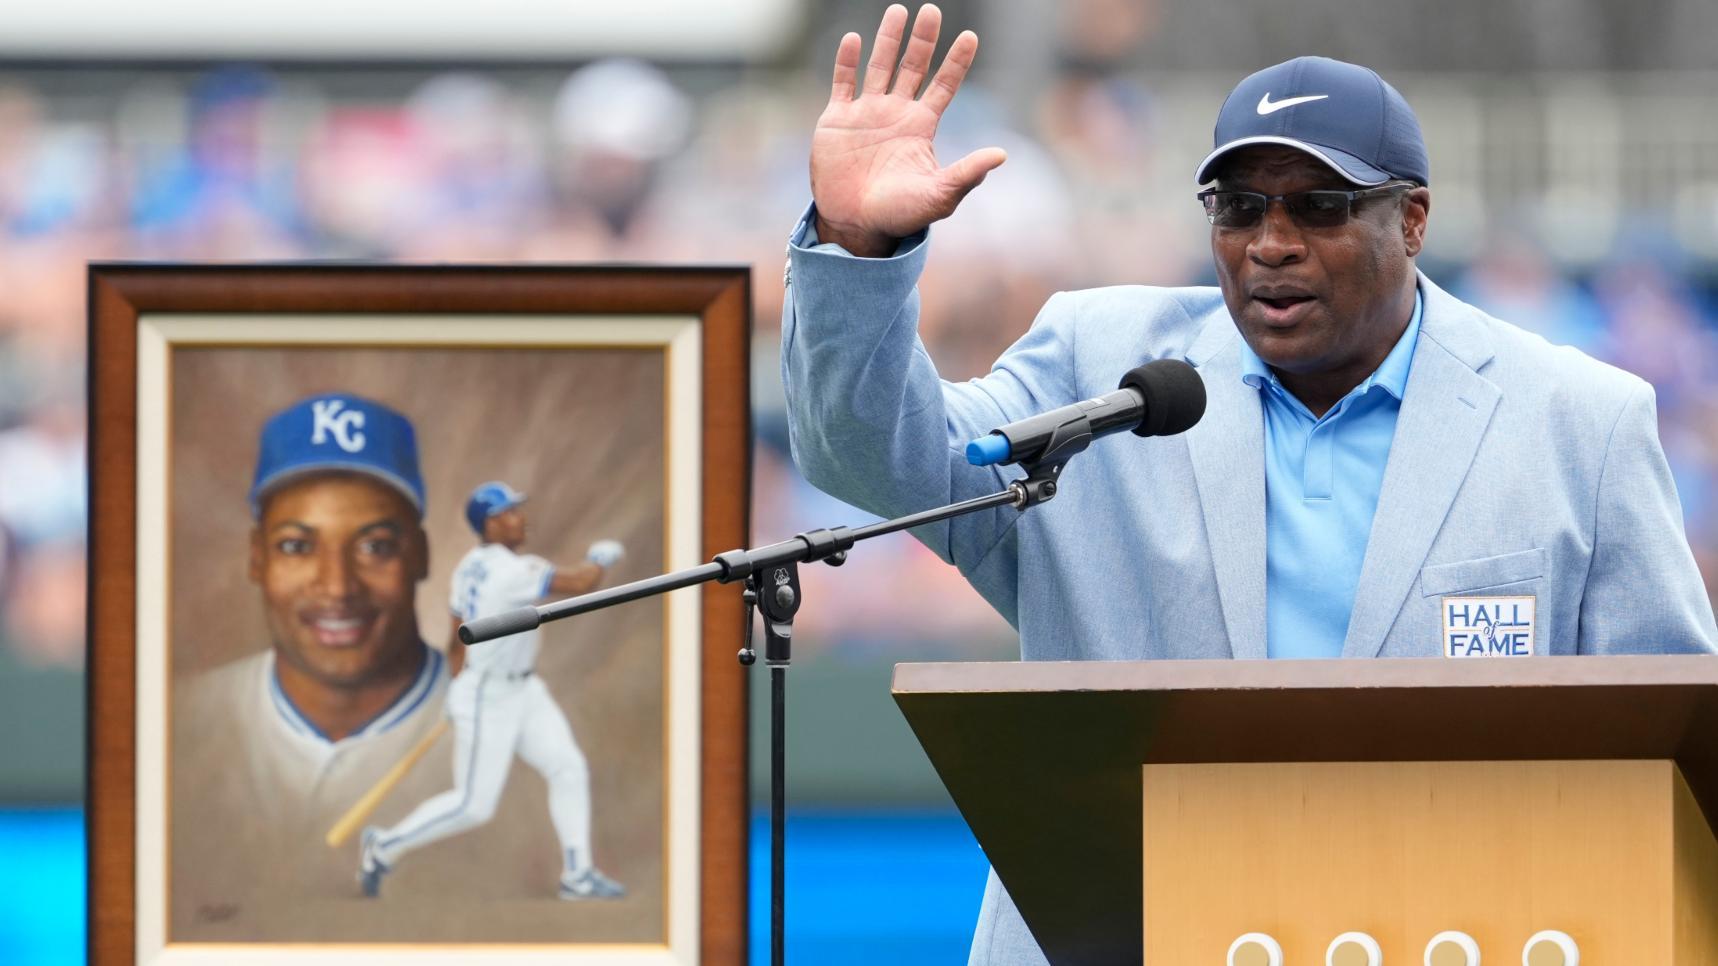 Bo Jackson thanks fans, tosses first pitch after induction to Royals HOF